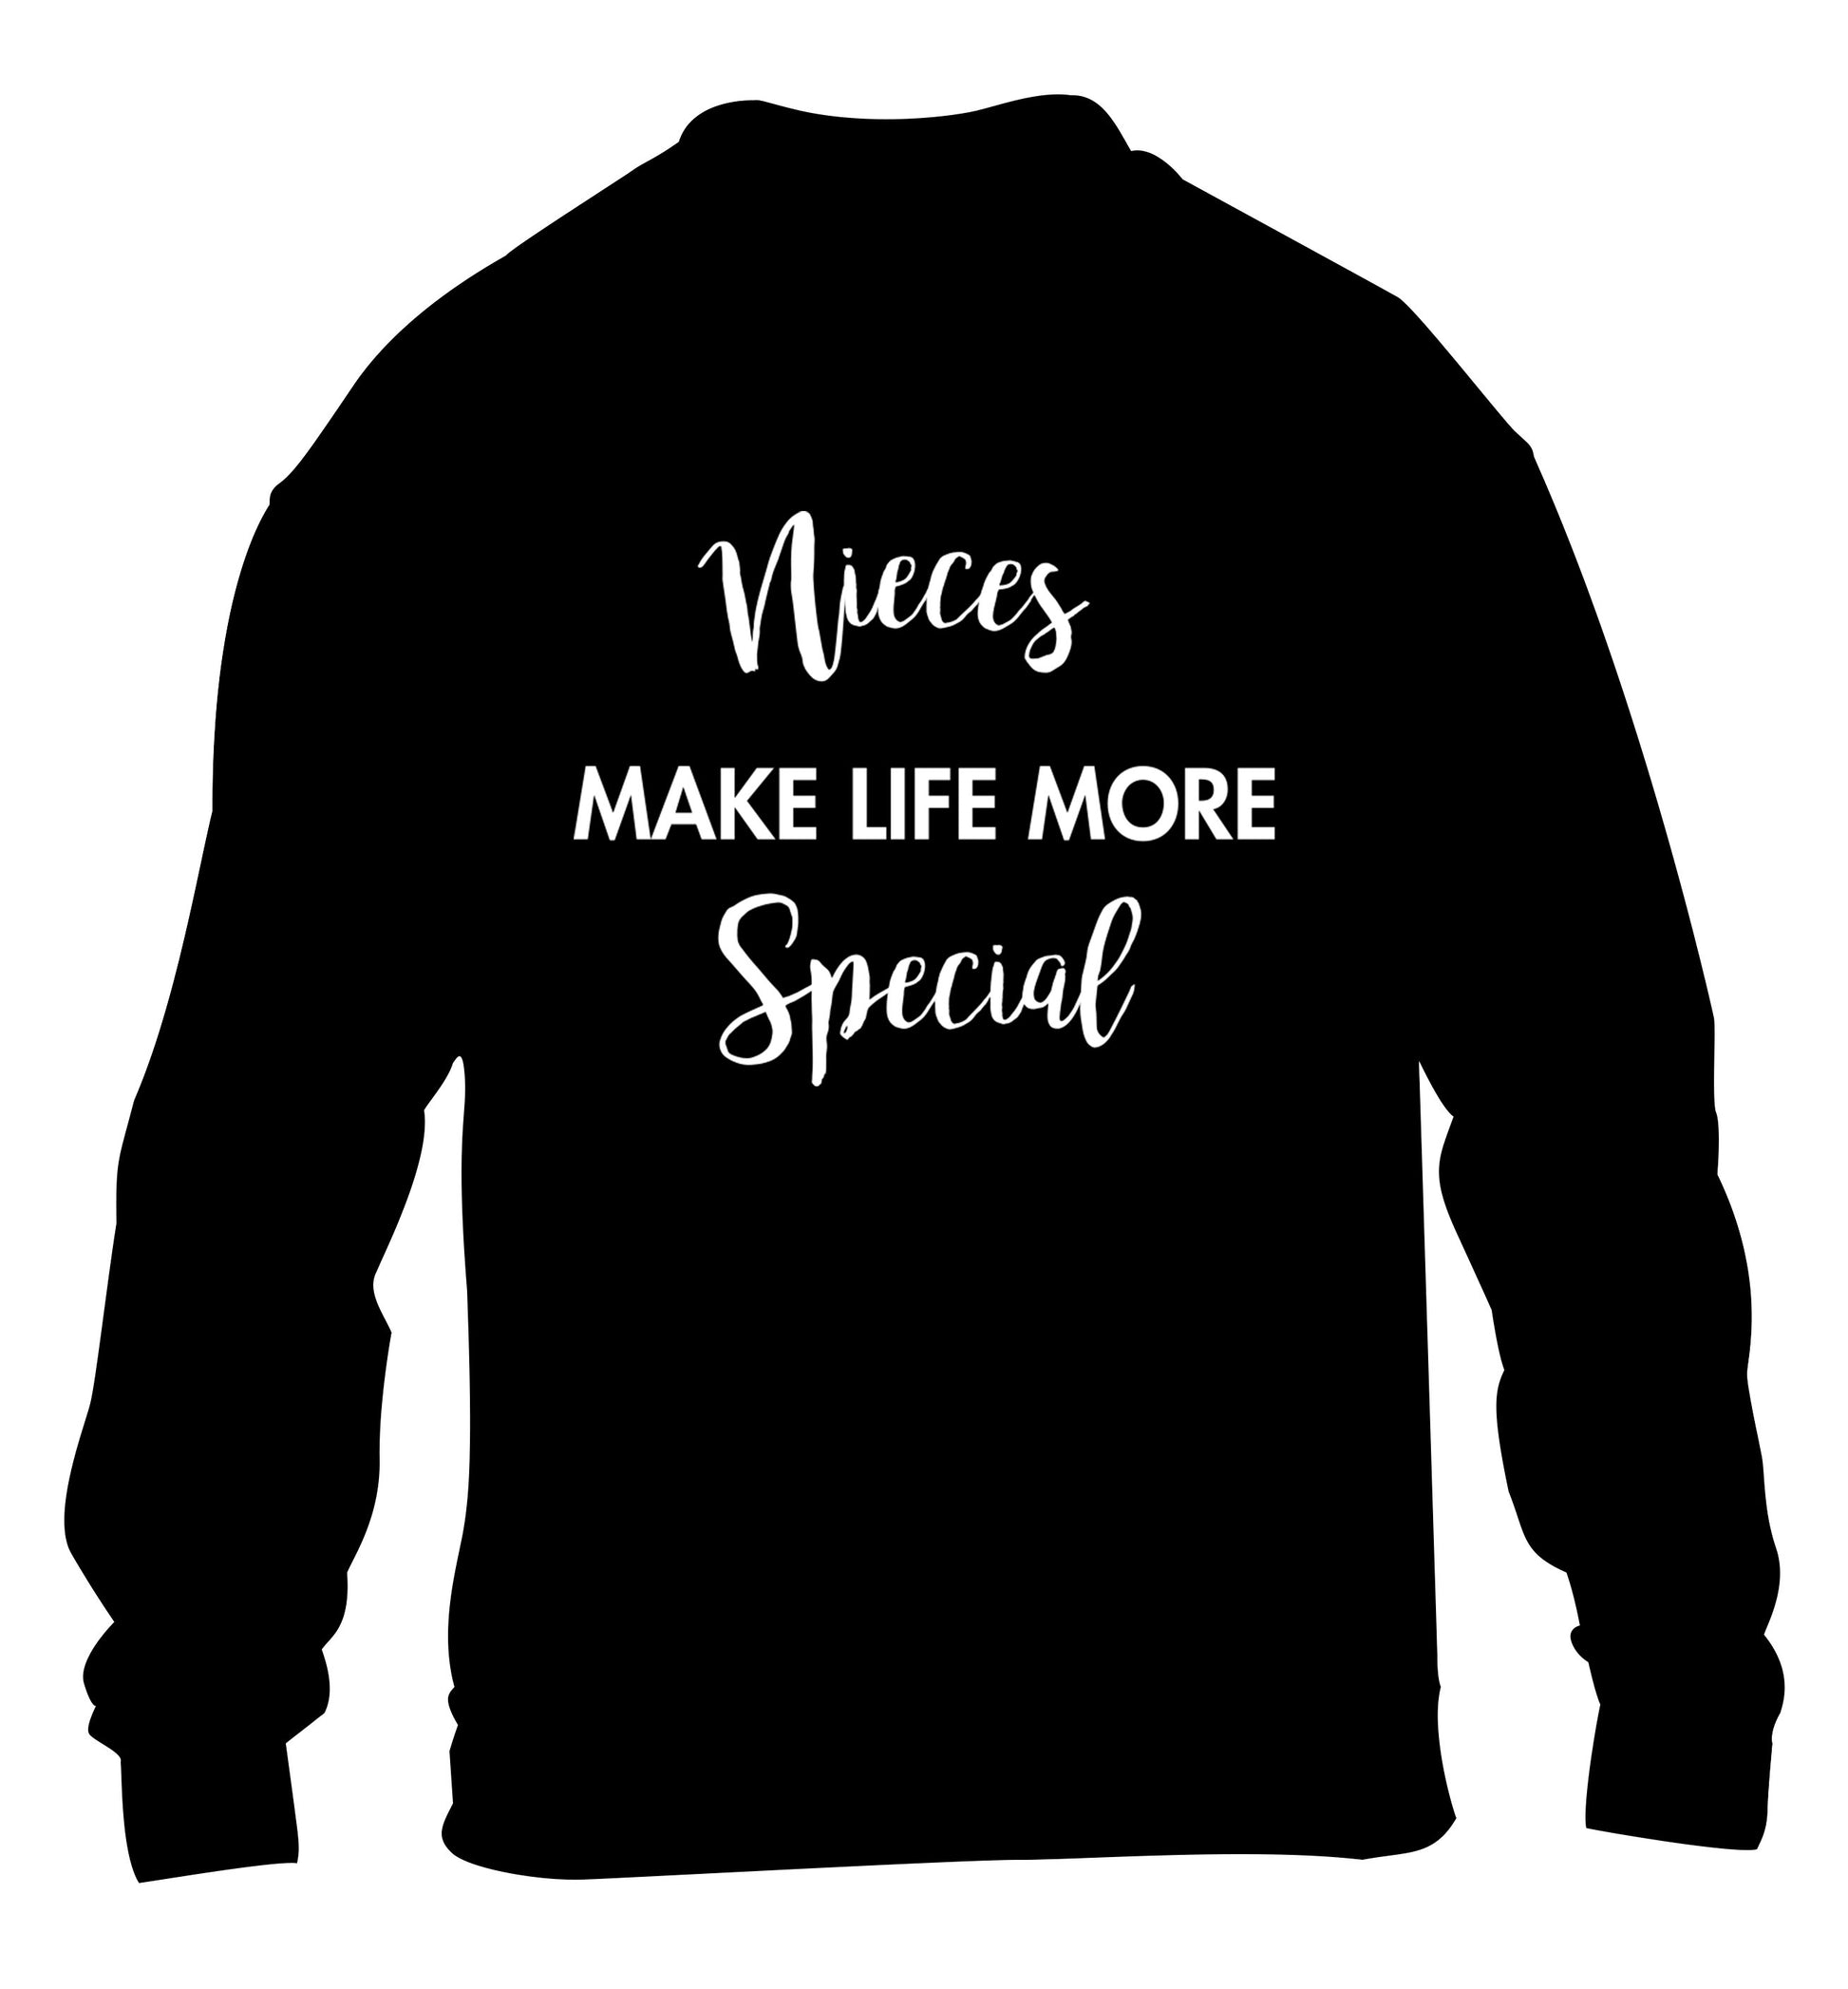 Nieces make life more special children's black sweater 12-14 Years